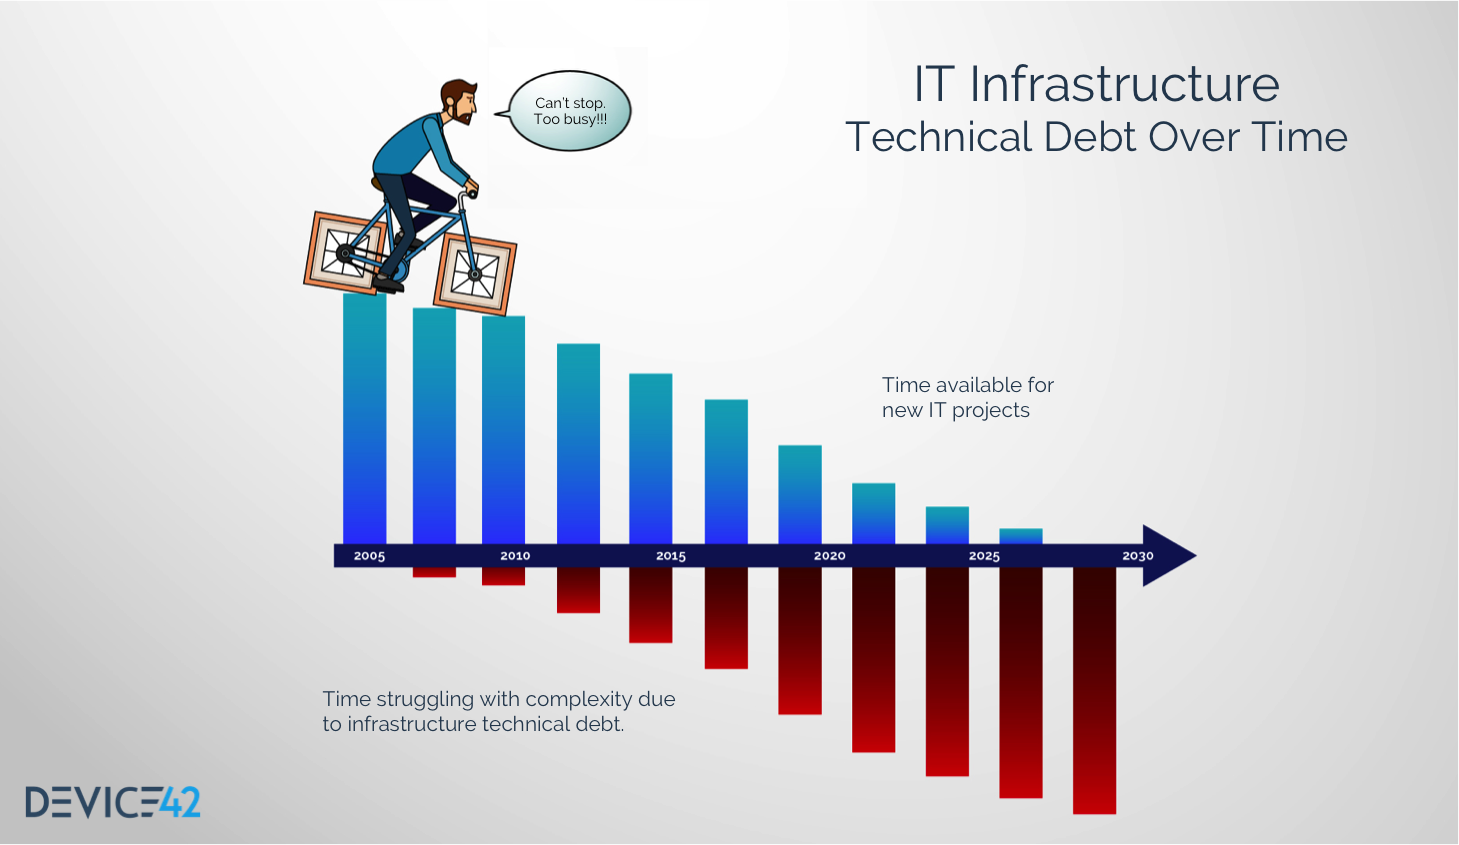 IT Infrastructure Technical Debt Over Time